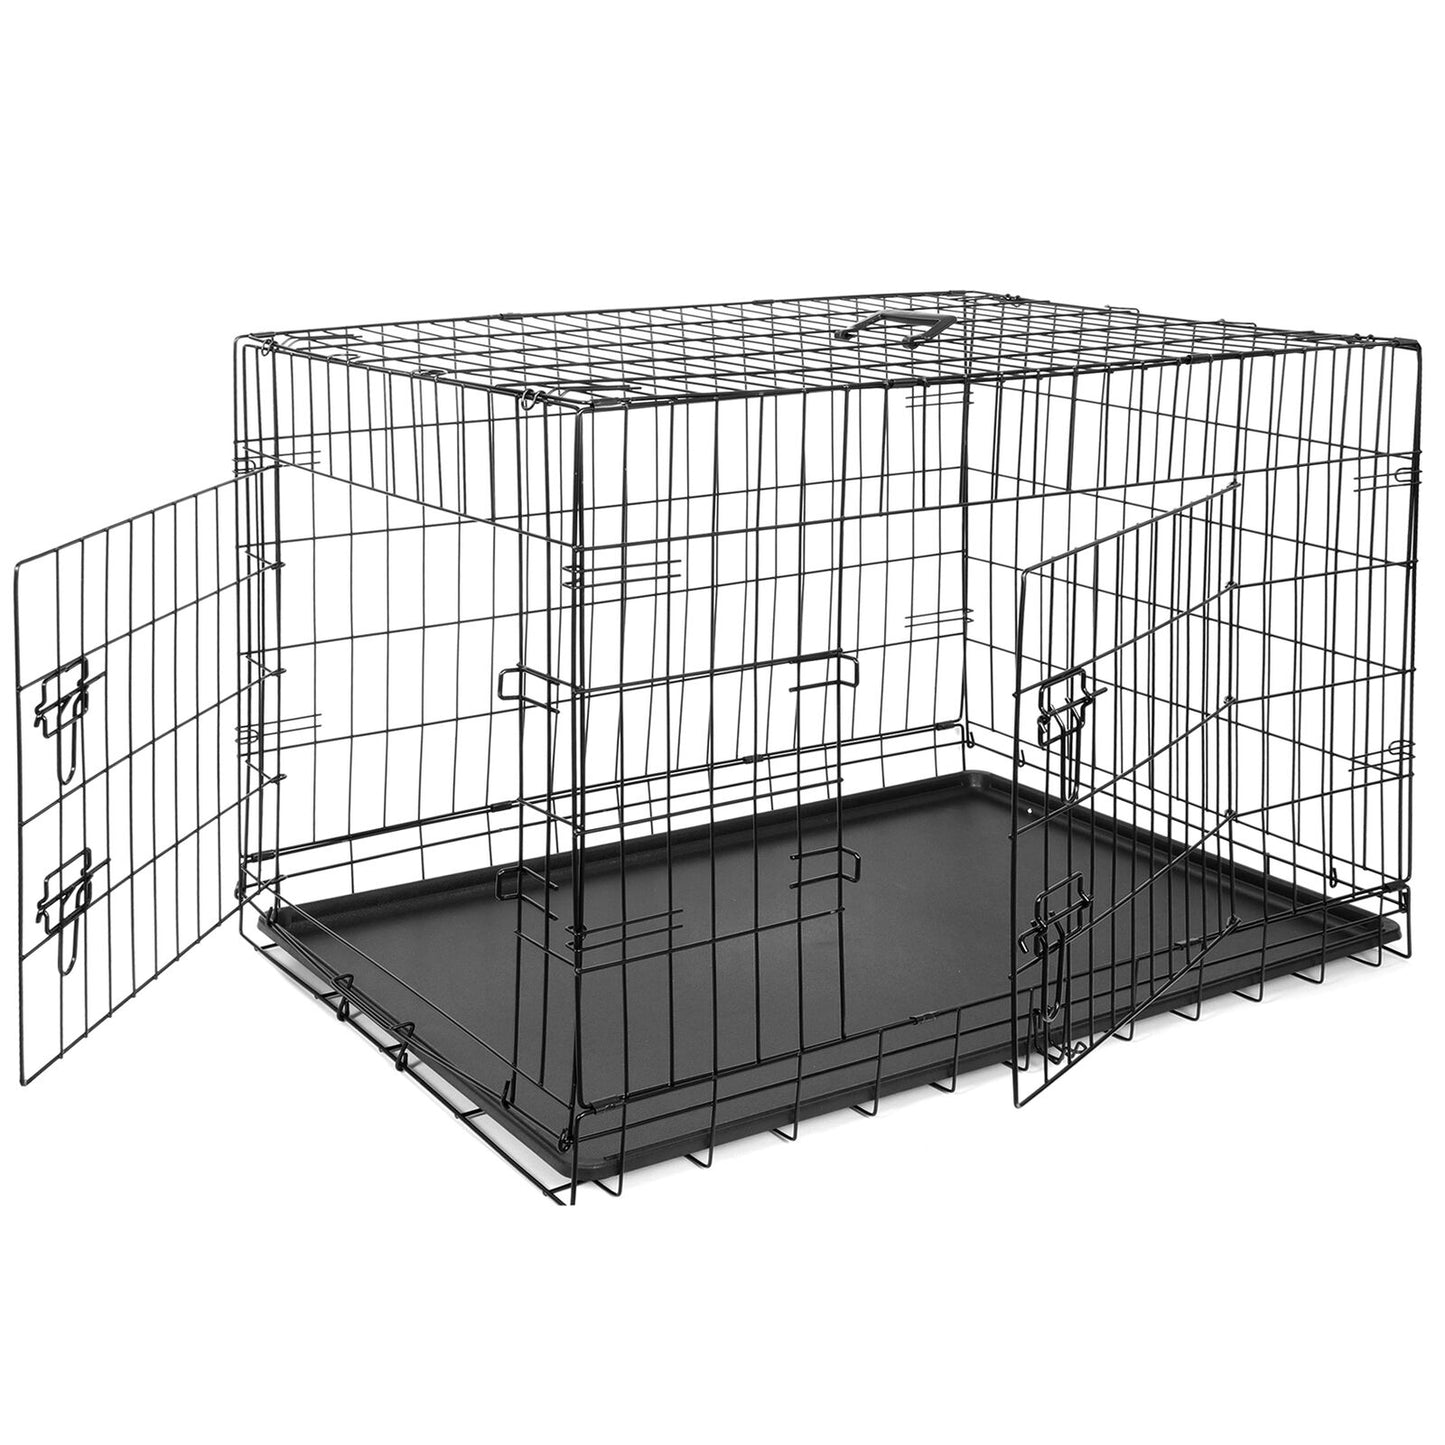 36" Black Metal Dog Crate Kennel Folding Pet Cage 2 Doors With Tray Pan